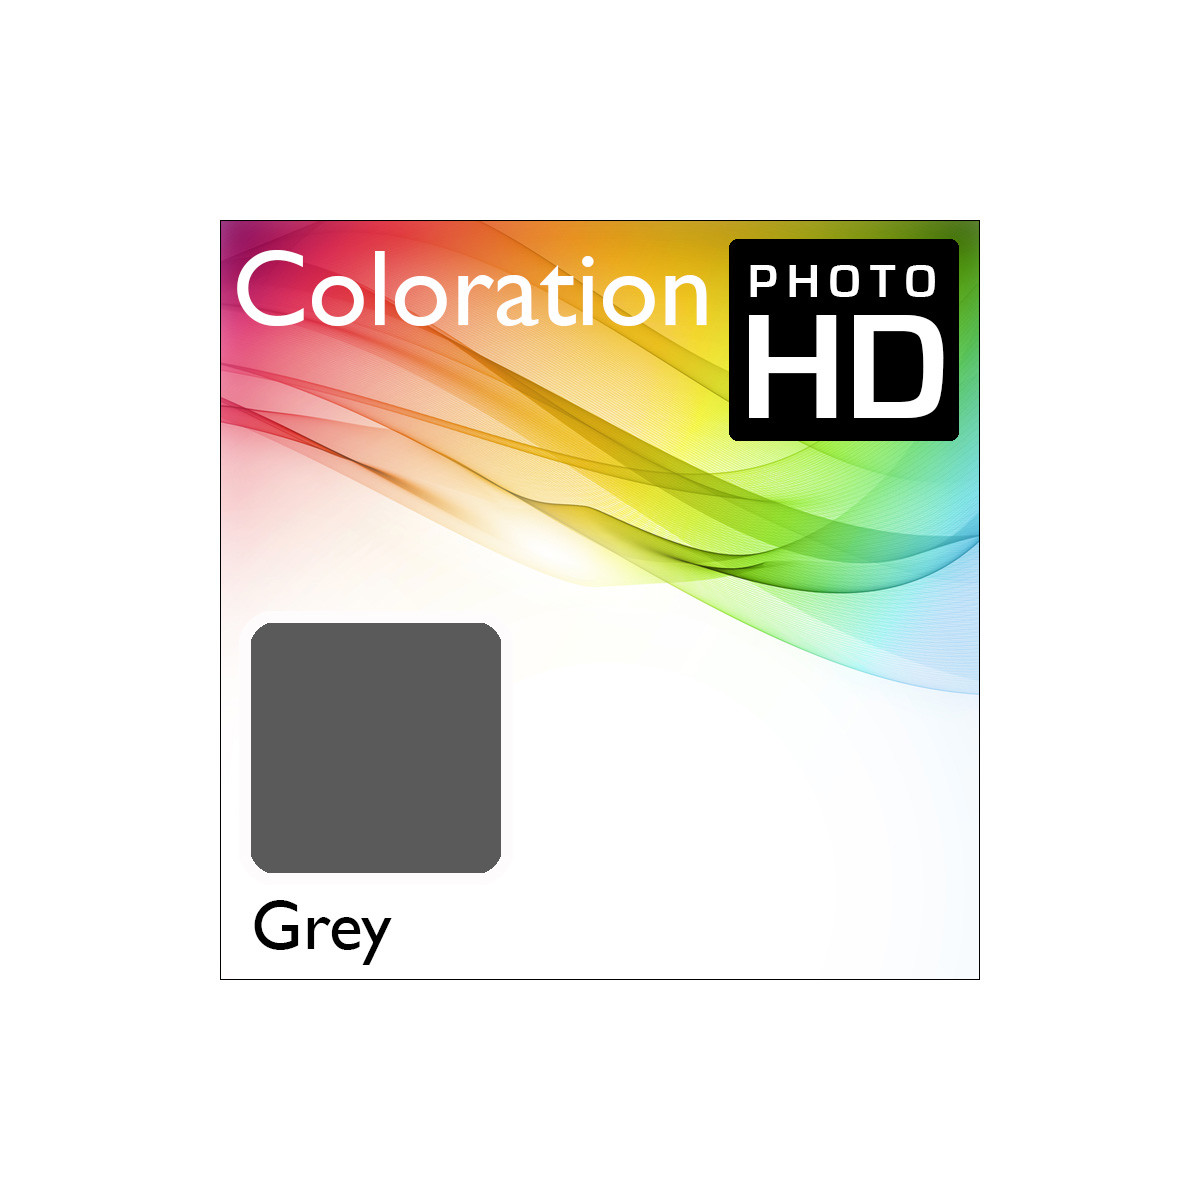 Coloration PhotoHD Flasche Grey